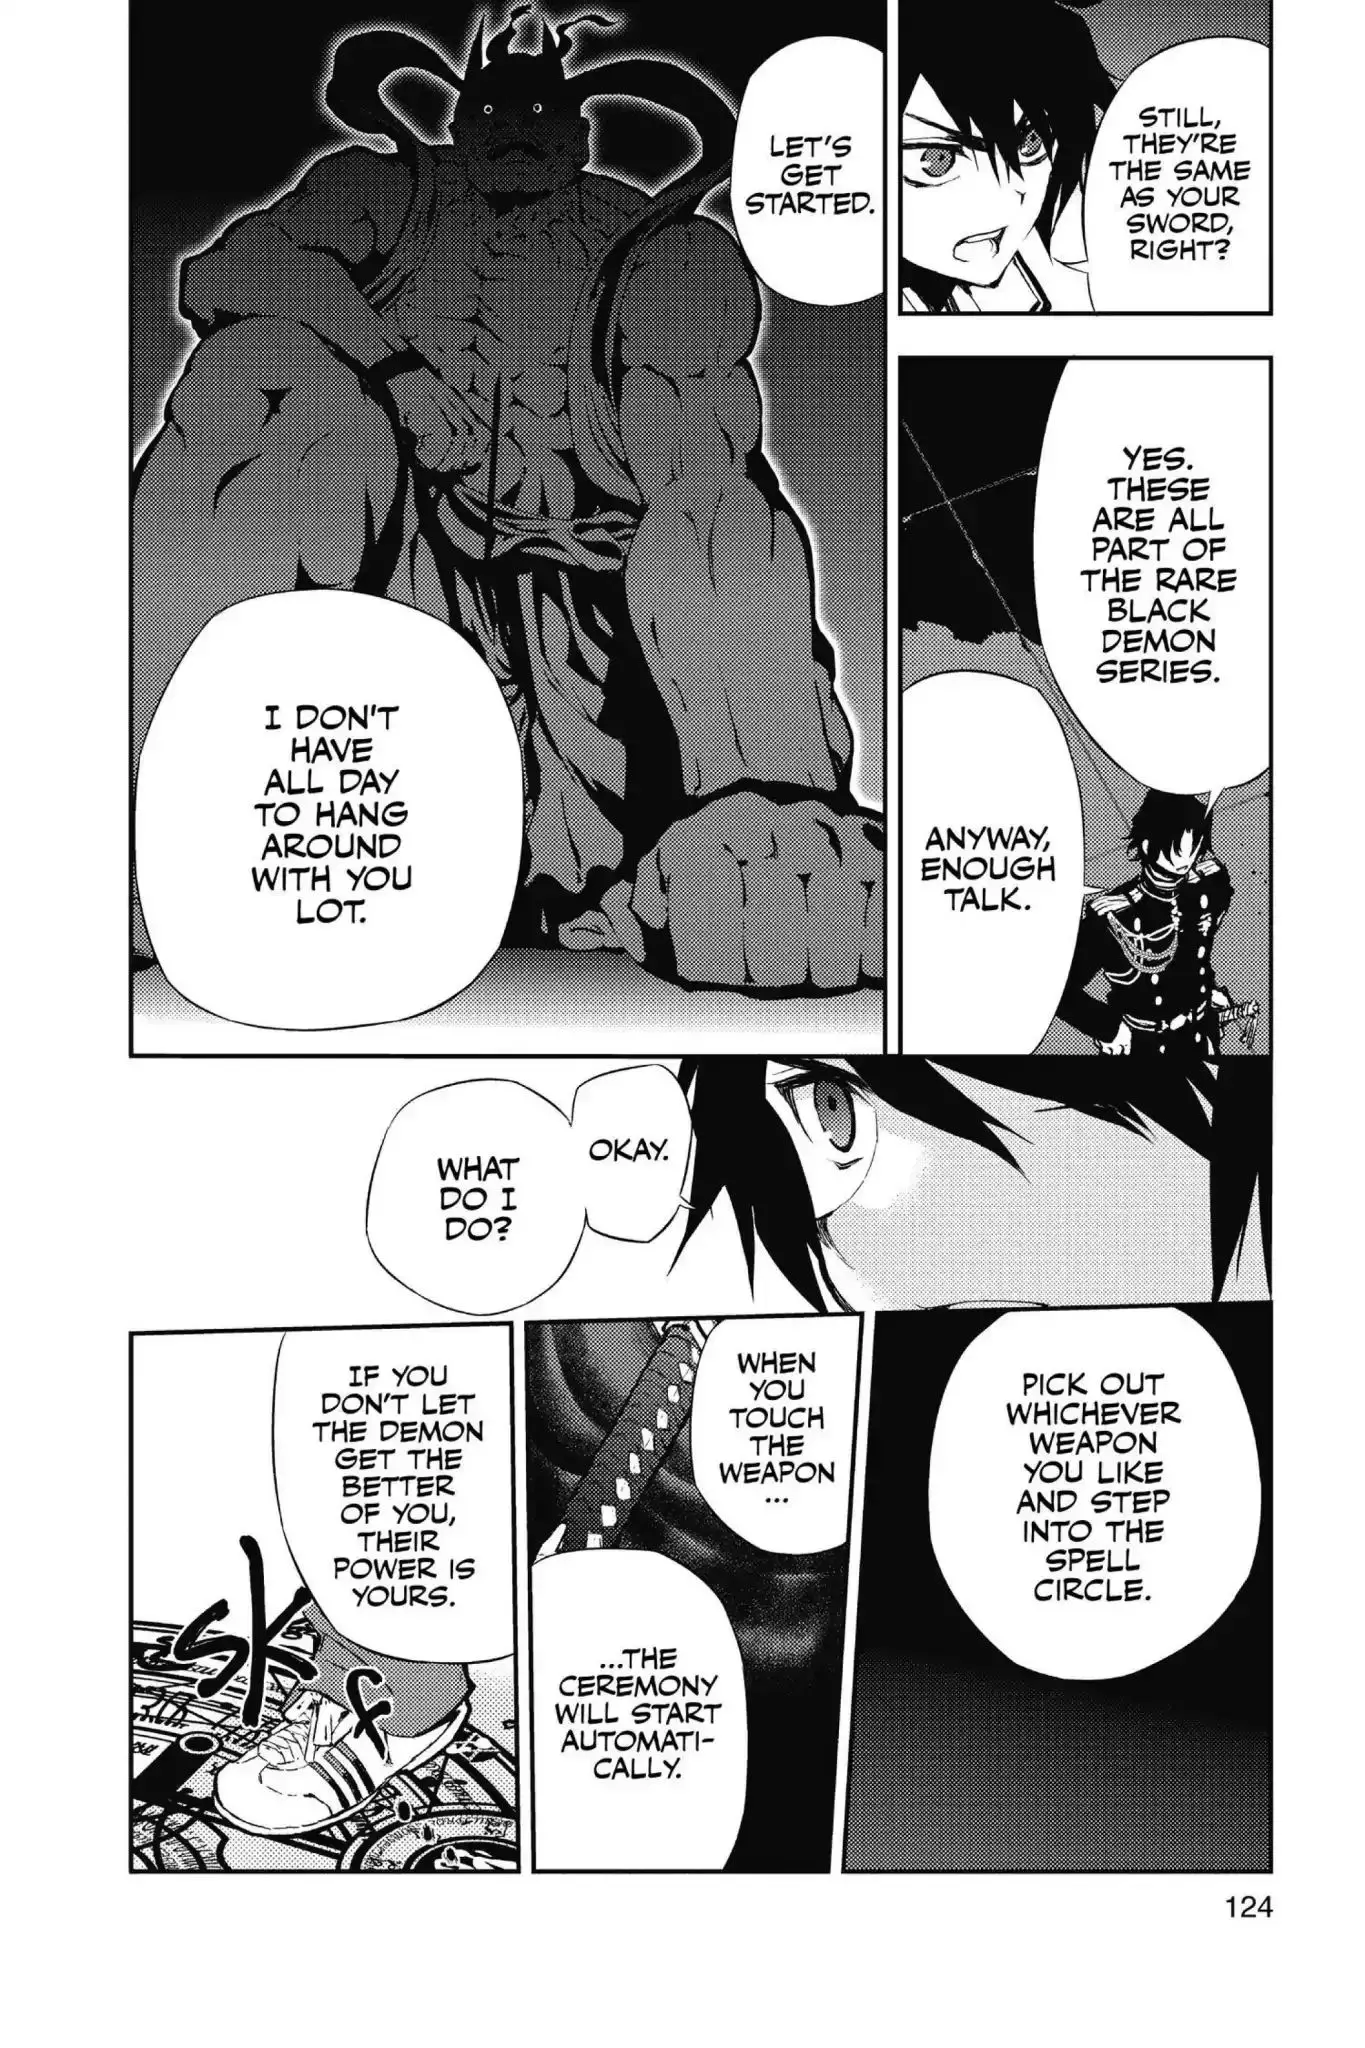 Seraph Of The End - 6 page 25-7177372a